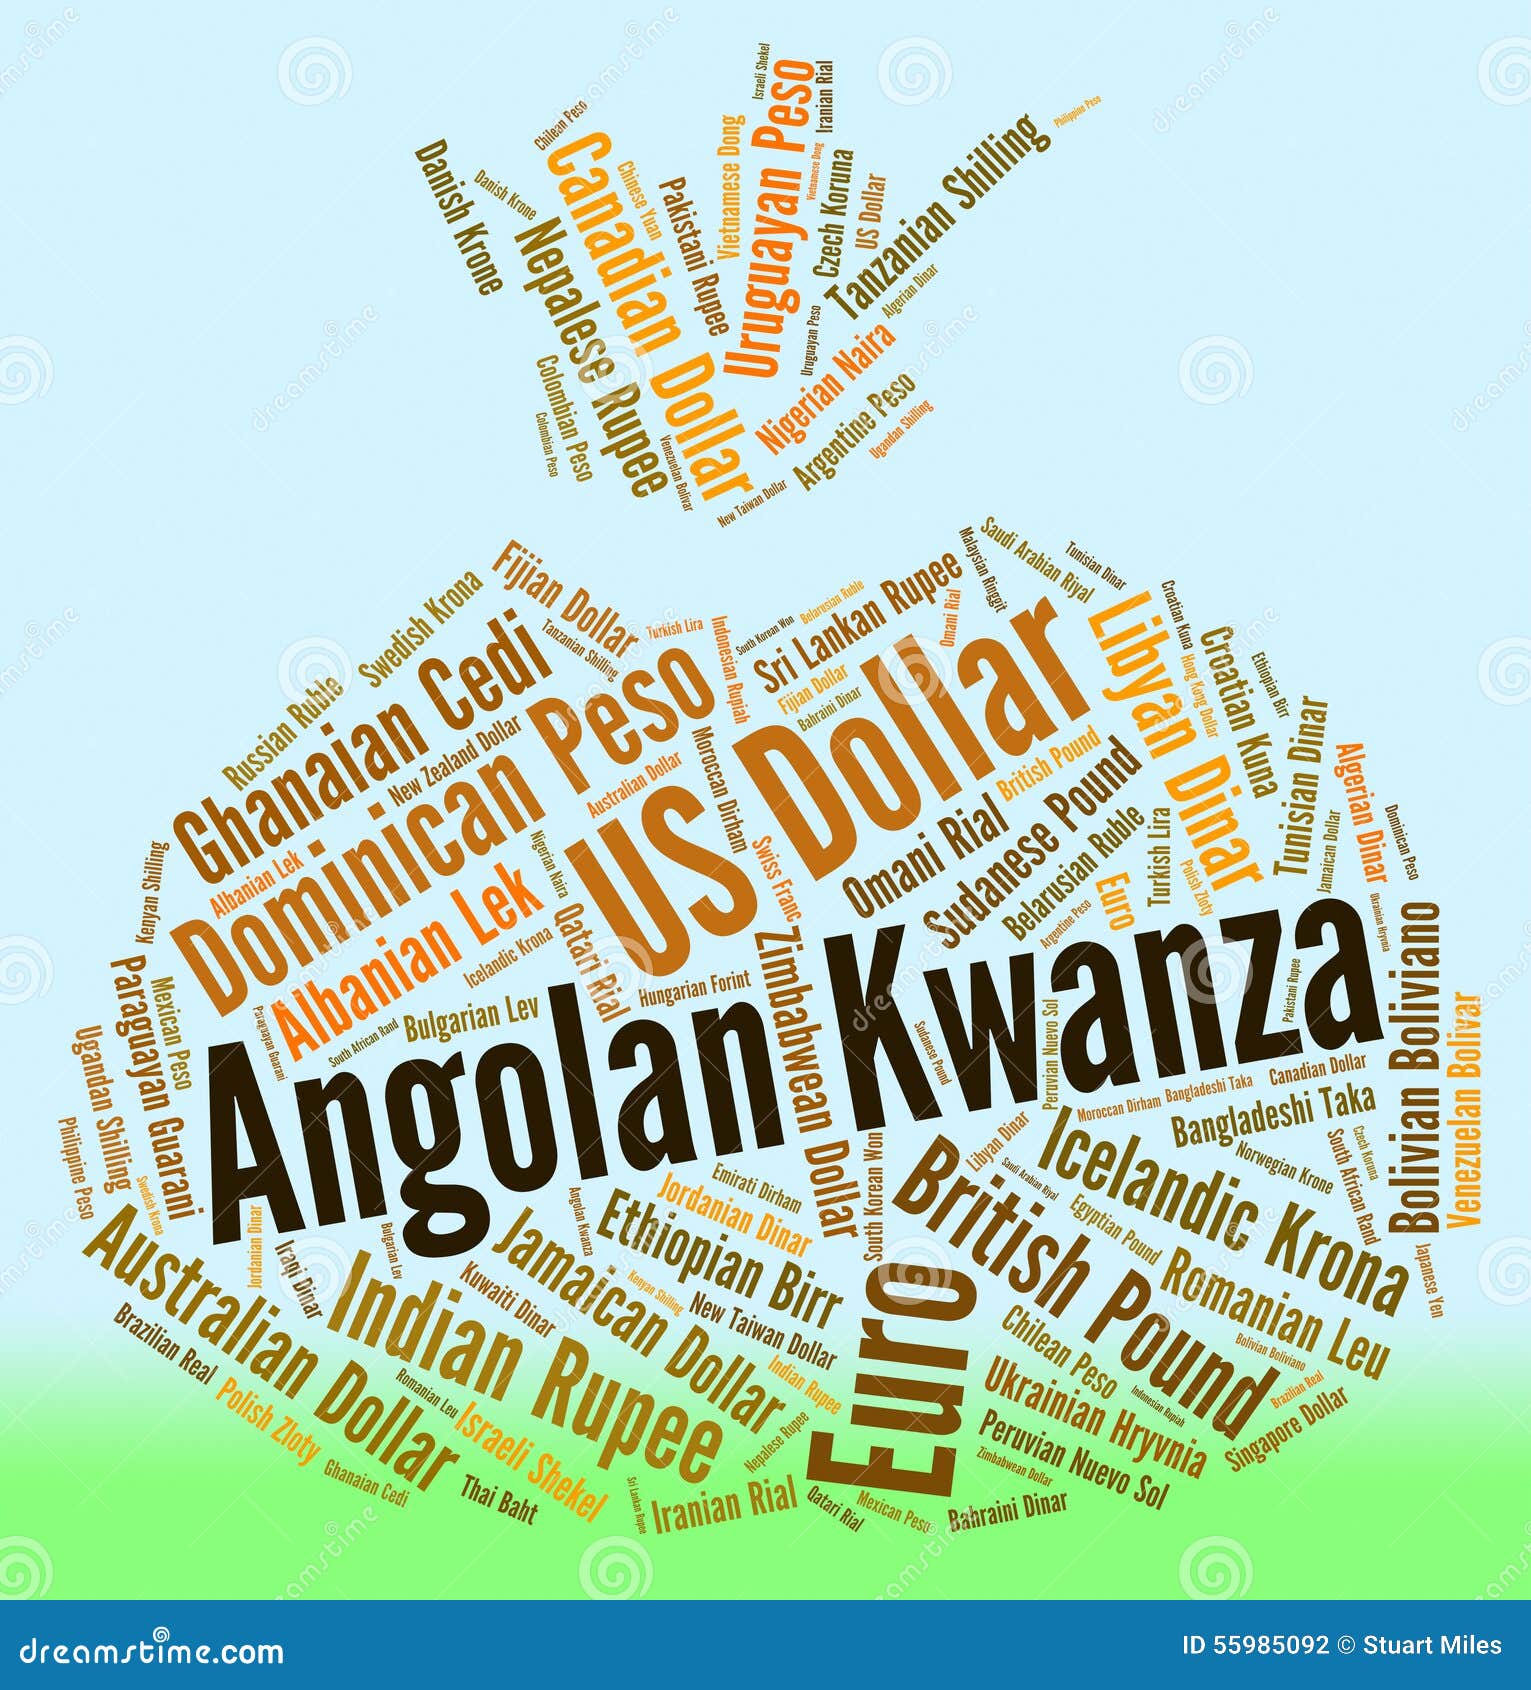 angolan kwanza shows forex trading and coin